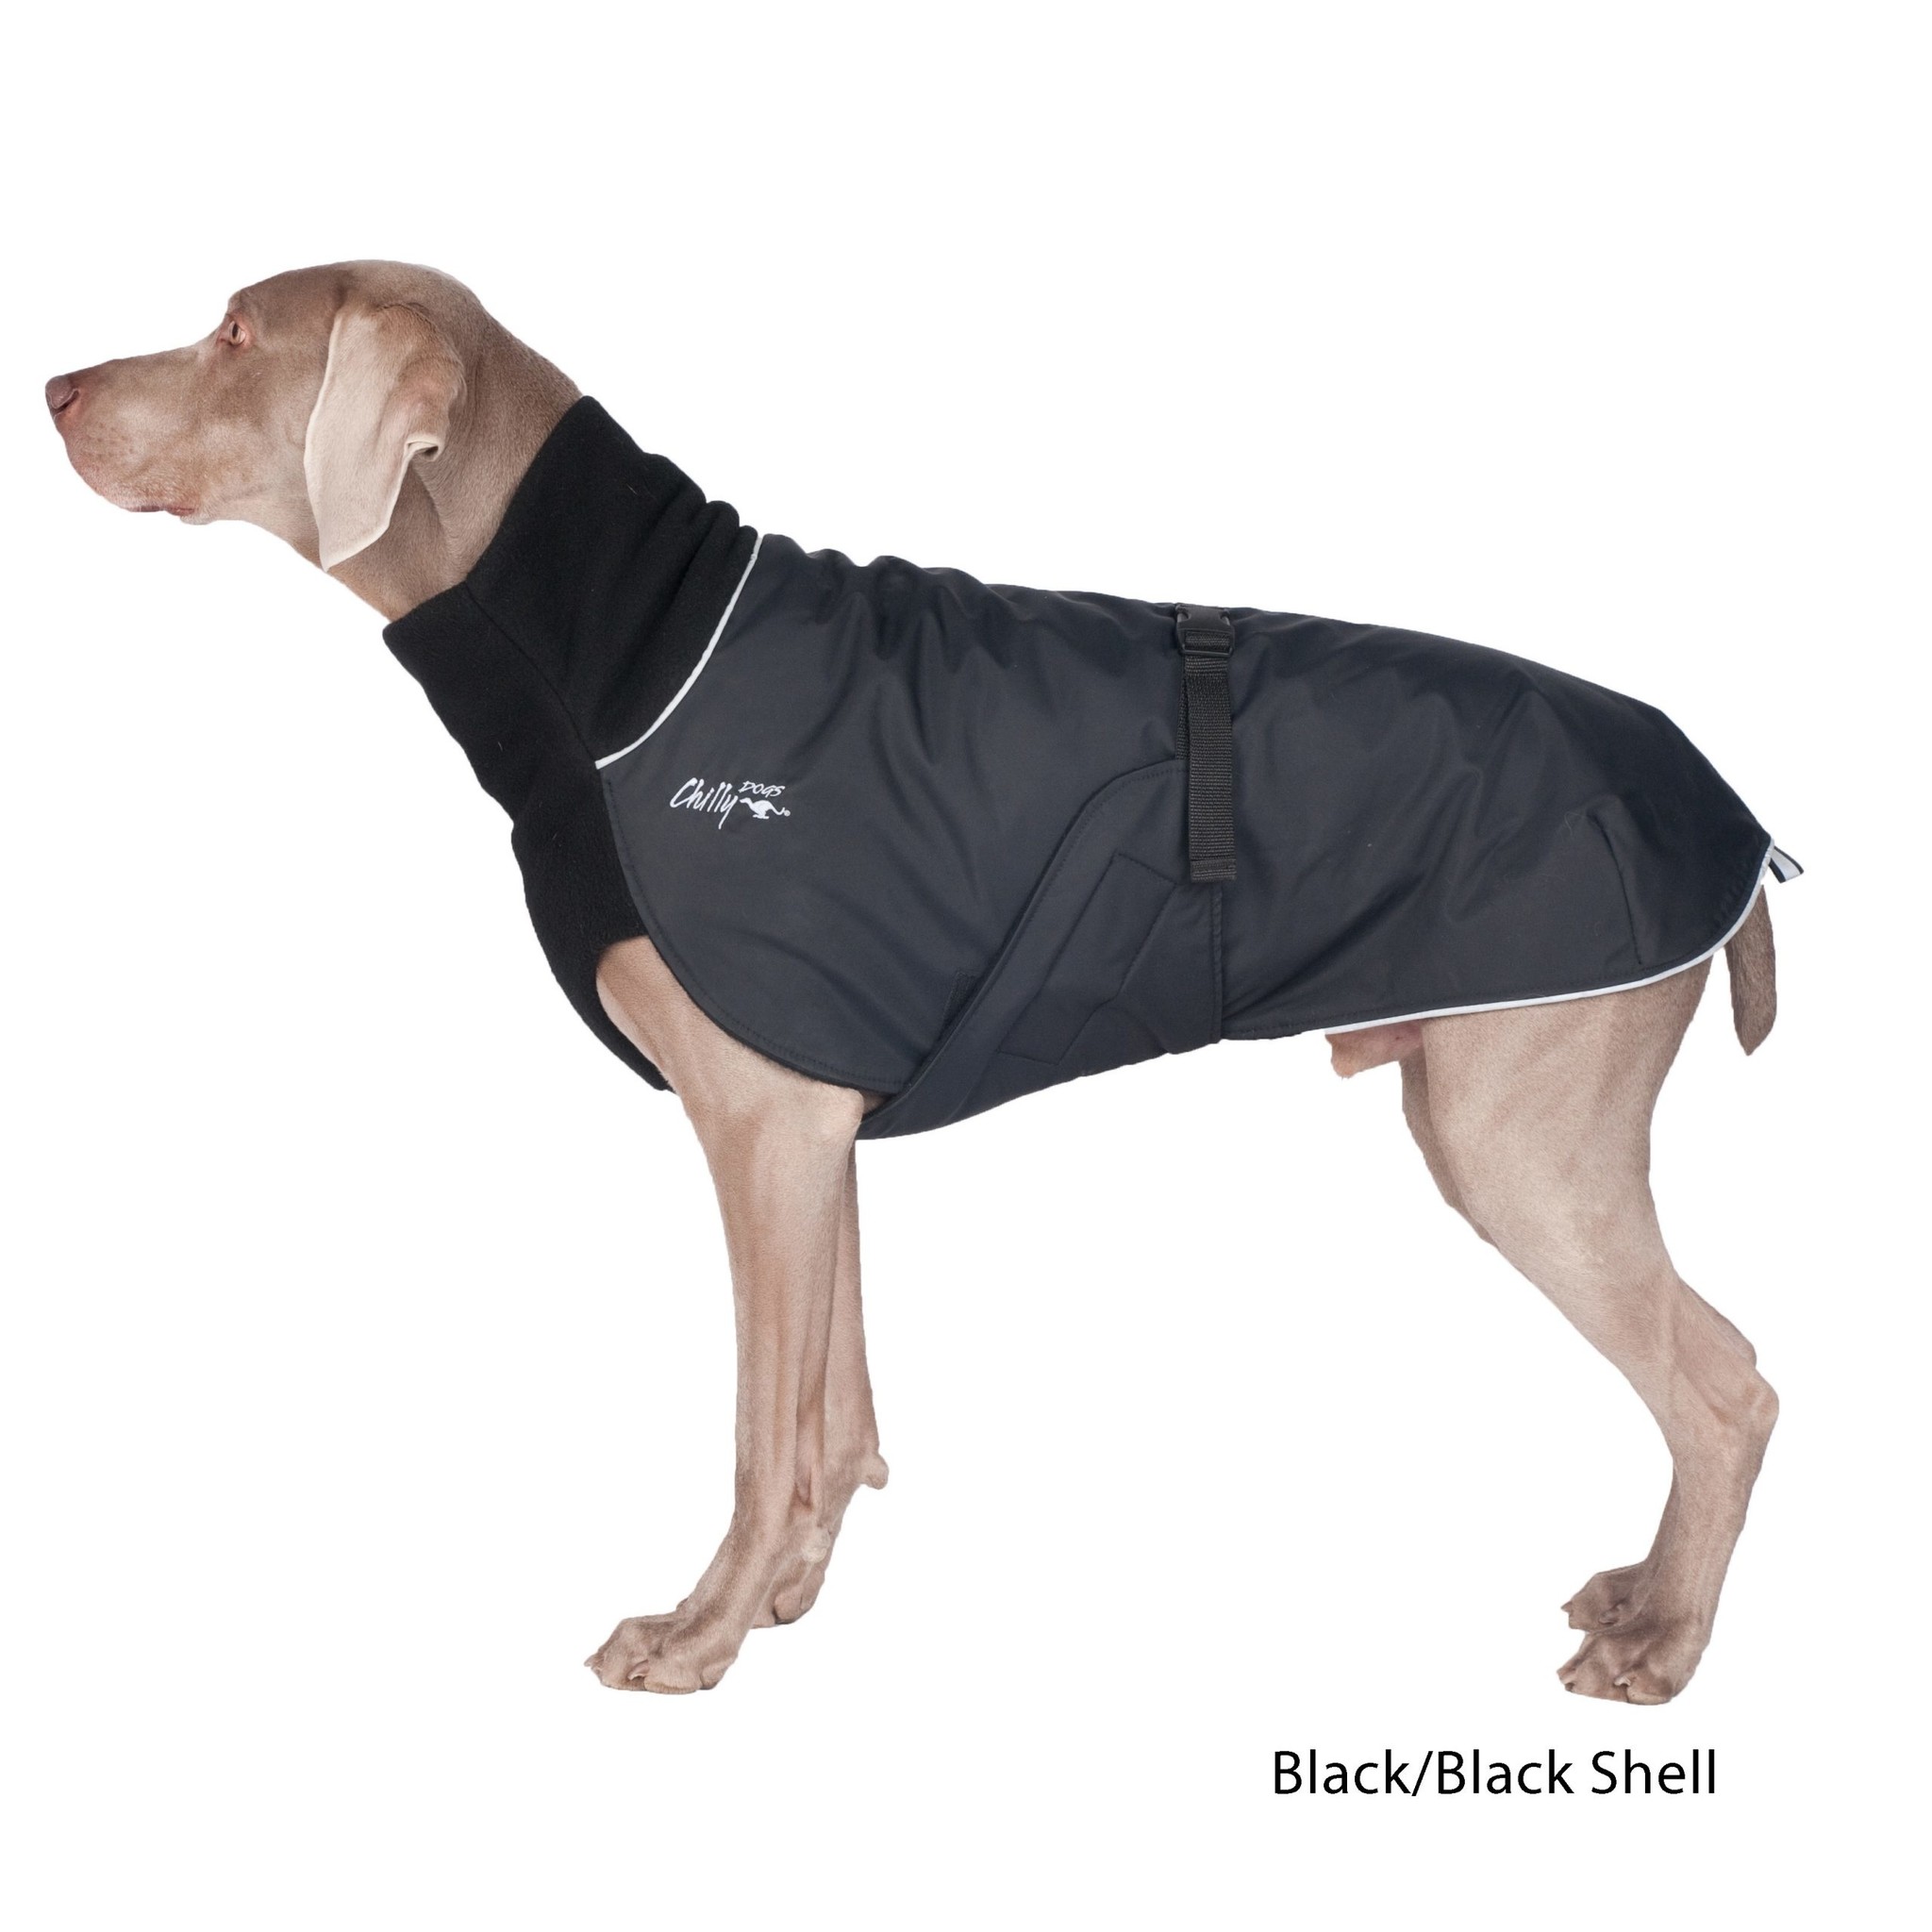 Chilly Dogs Jackets Chilly Dogs - GWN Standard BLACK